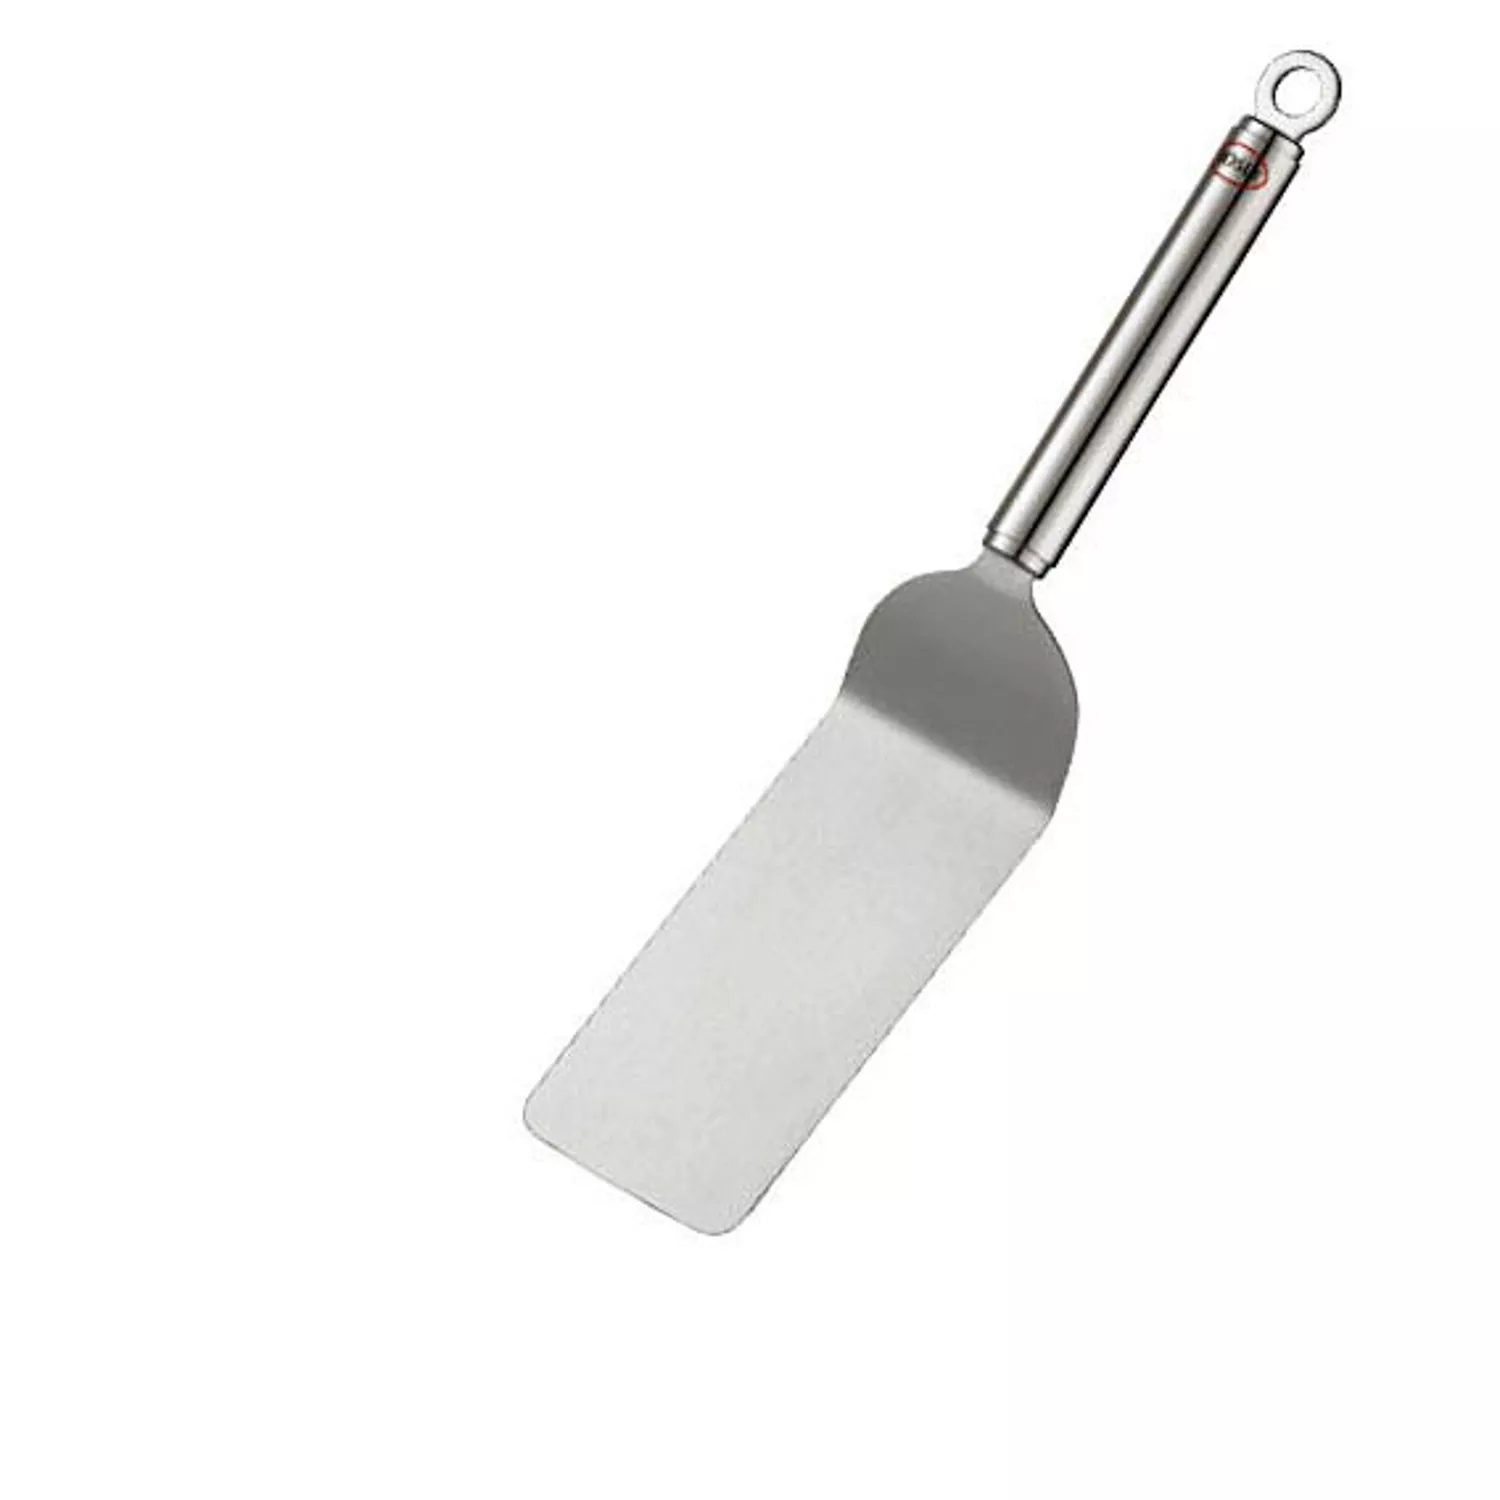 Online Tapered Spatula with Multi-Purpose Tool in Usa